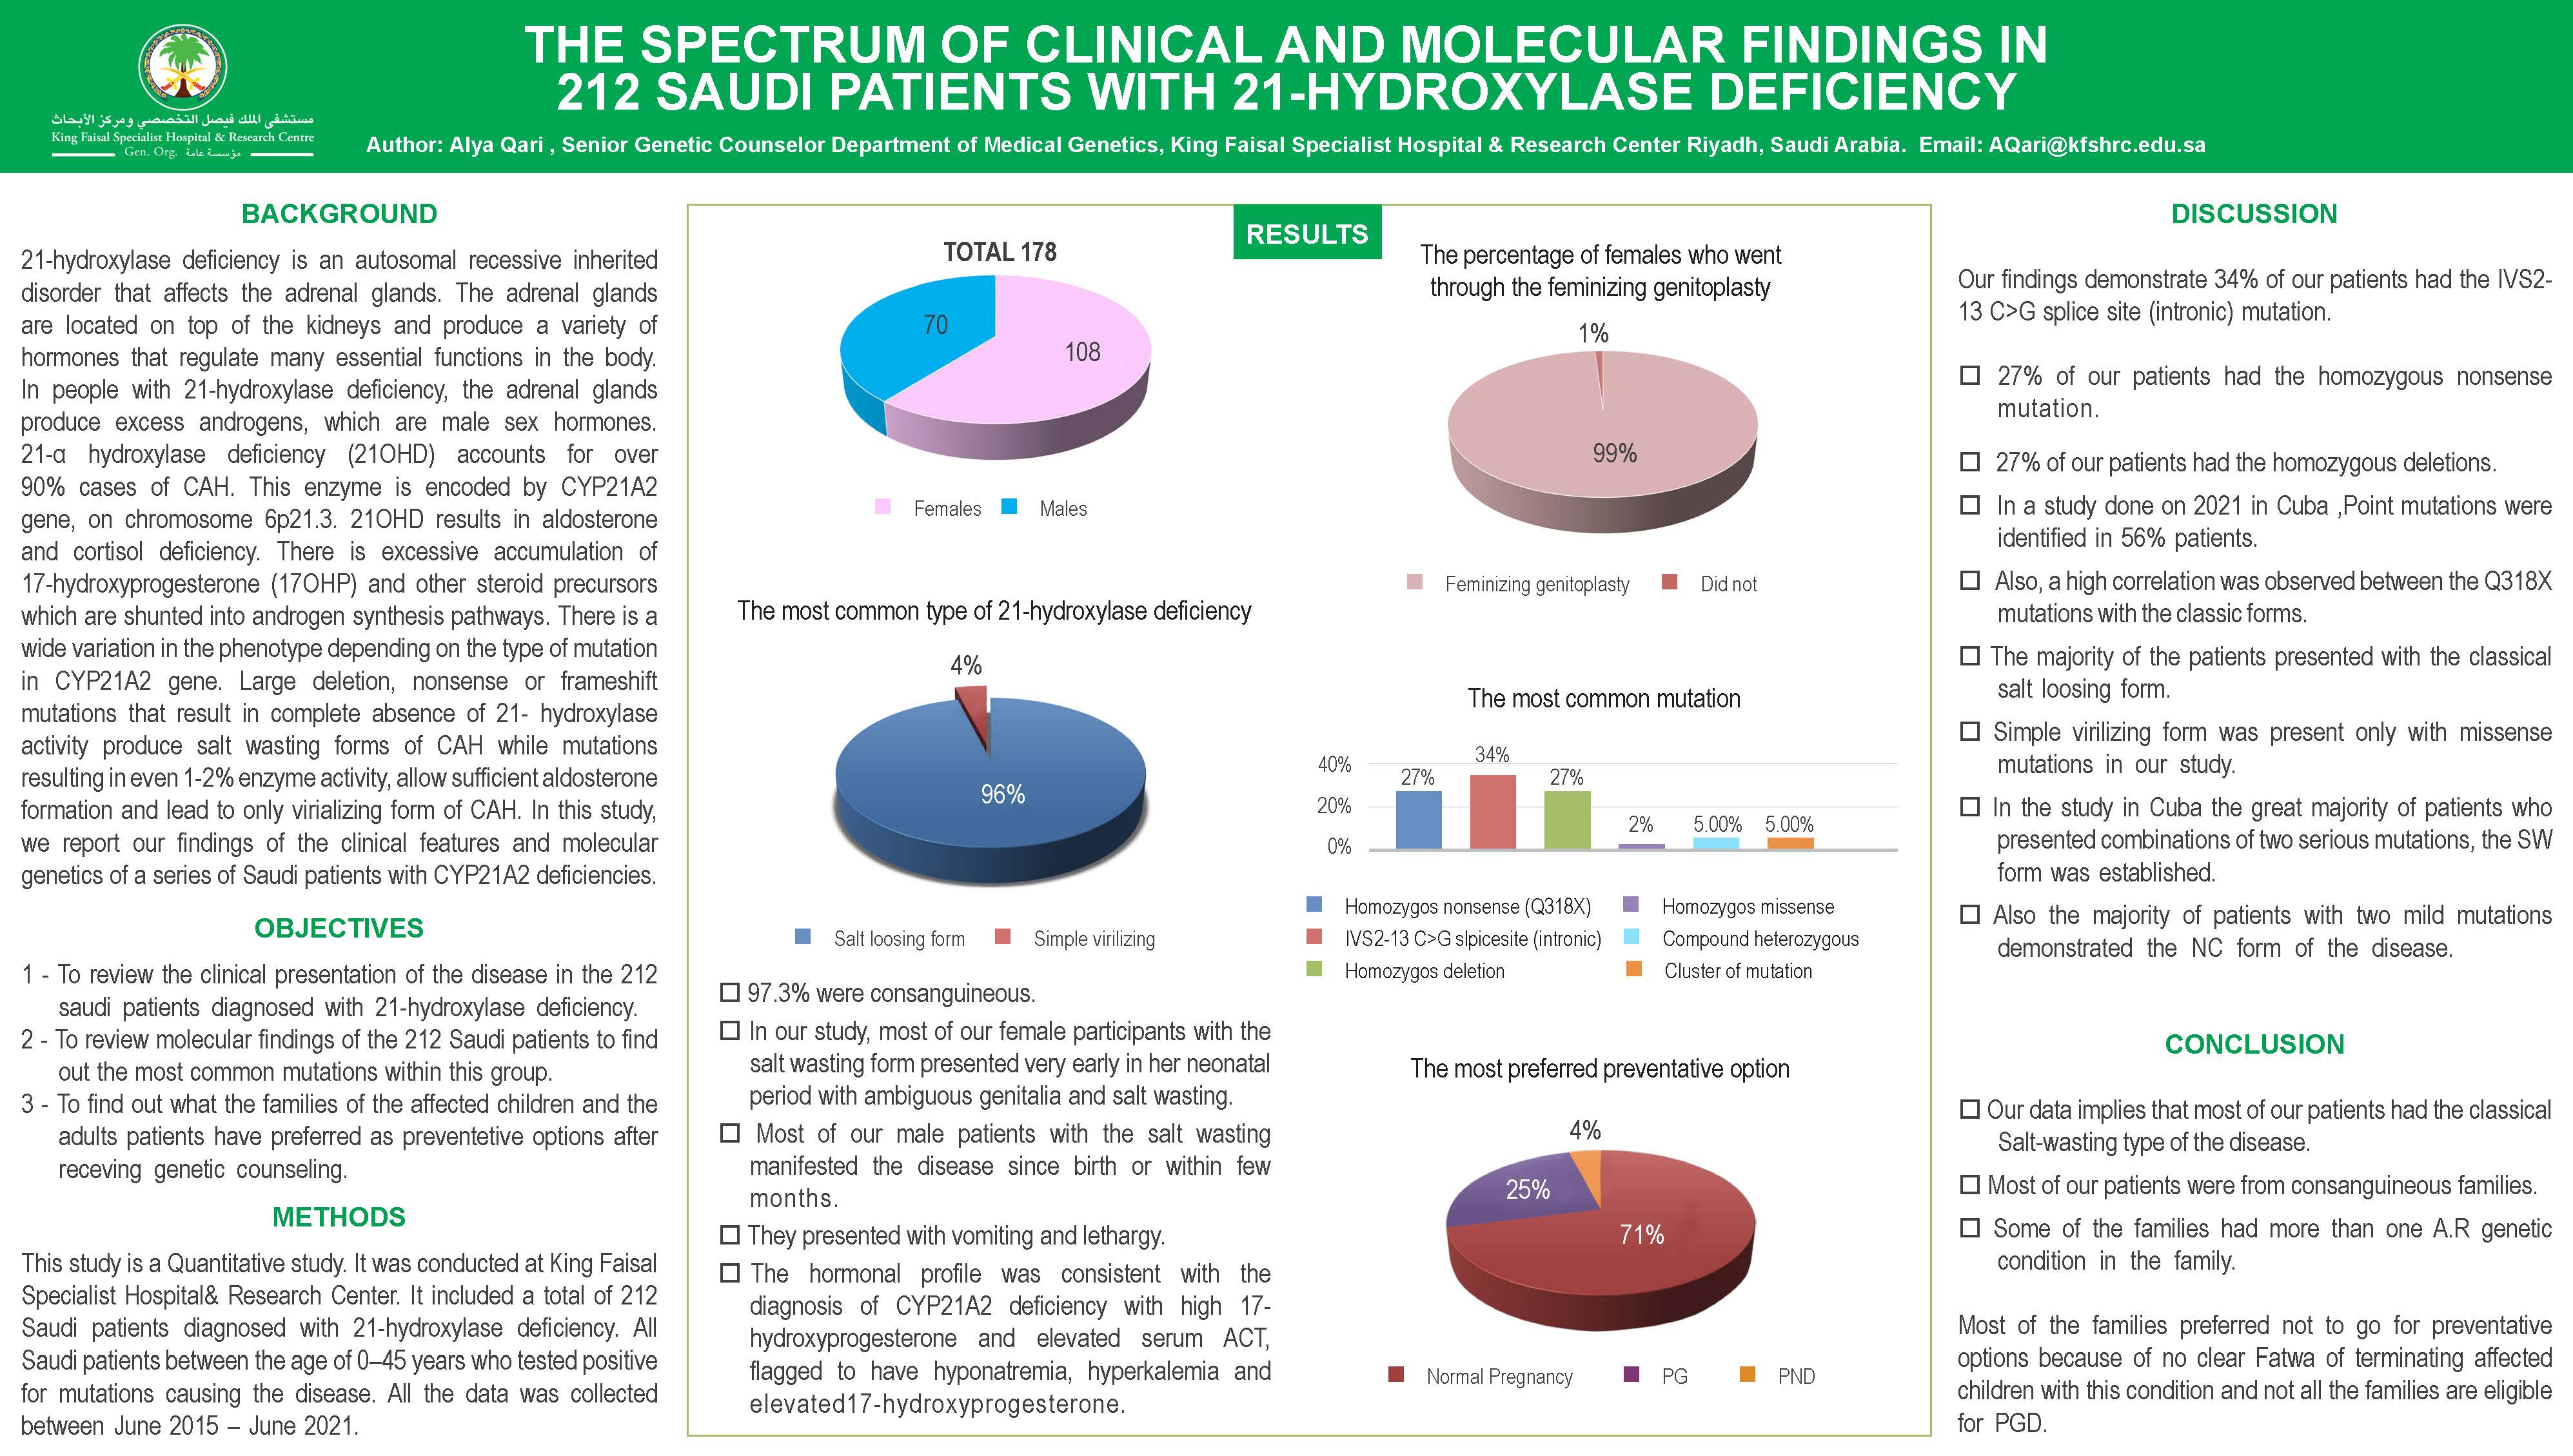 THE SPECTRUM OF CLINICAL AND MOLECULAR FINDINGS IN 212 SAUDI PATIENTS WITH 21-HYDROXYLASE DEFCIENCY